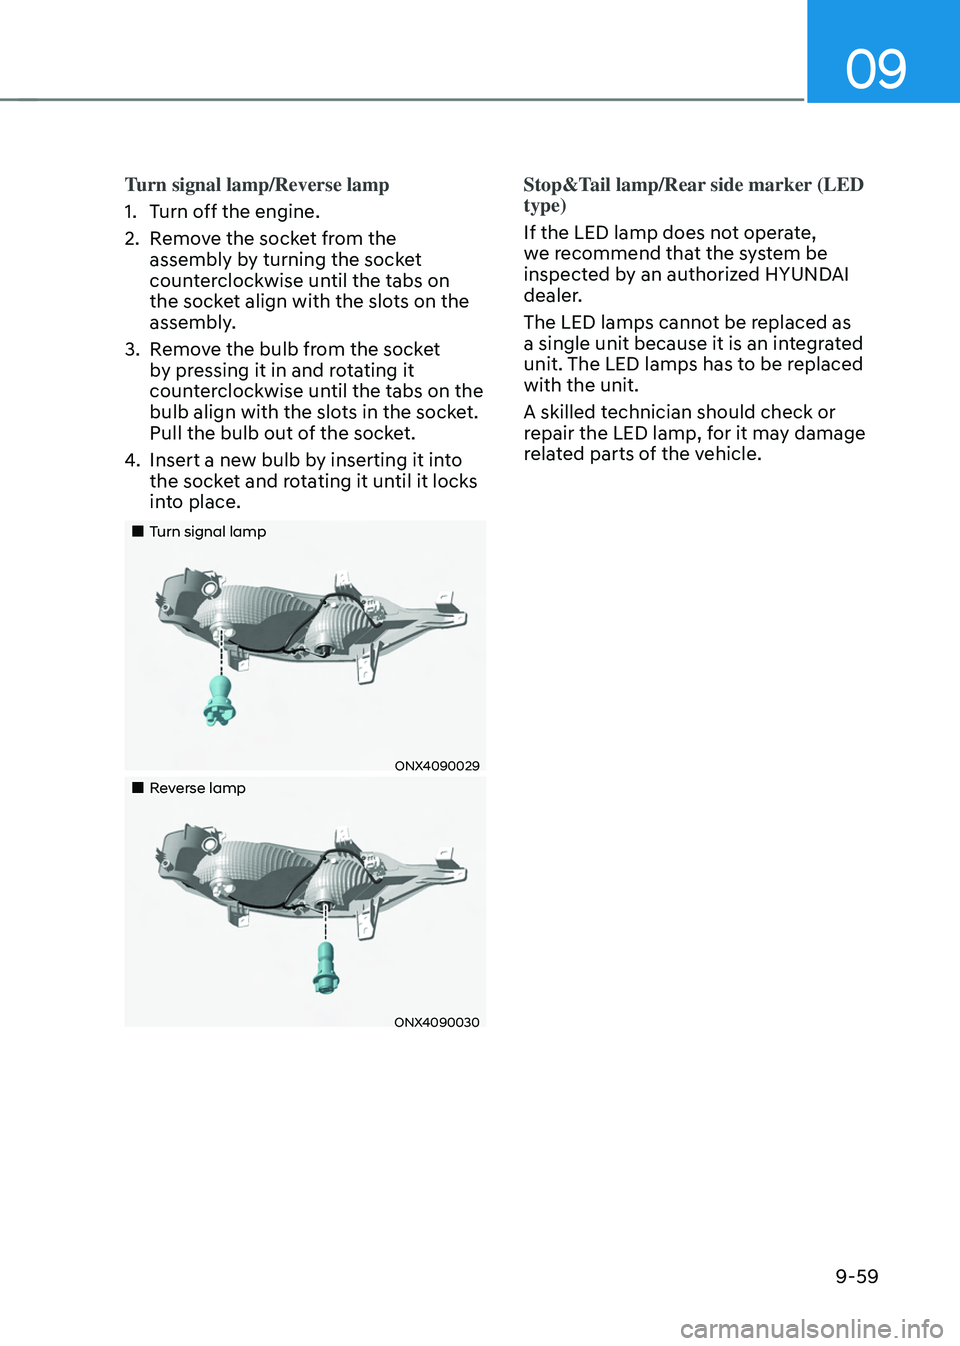 HYUNDAI TUCSON 2022  Owners Manual 09
9-59
Turn signal lamp/Reverse lamp
1. Turn off the engine. 
2. Remove the socket from the 
assembly by turning the socket 
counterclockwise until the tabs on 
the socket align with the slots on the